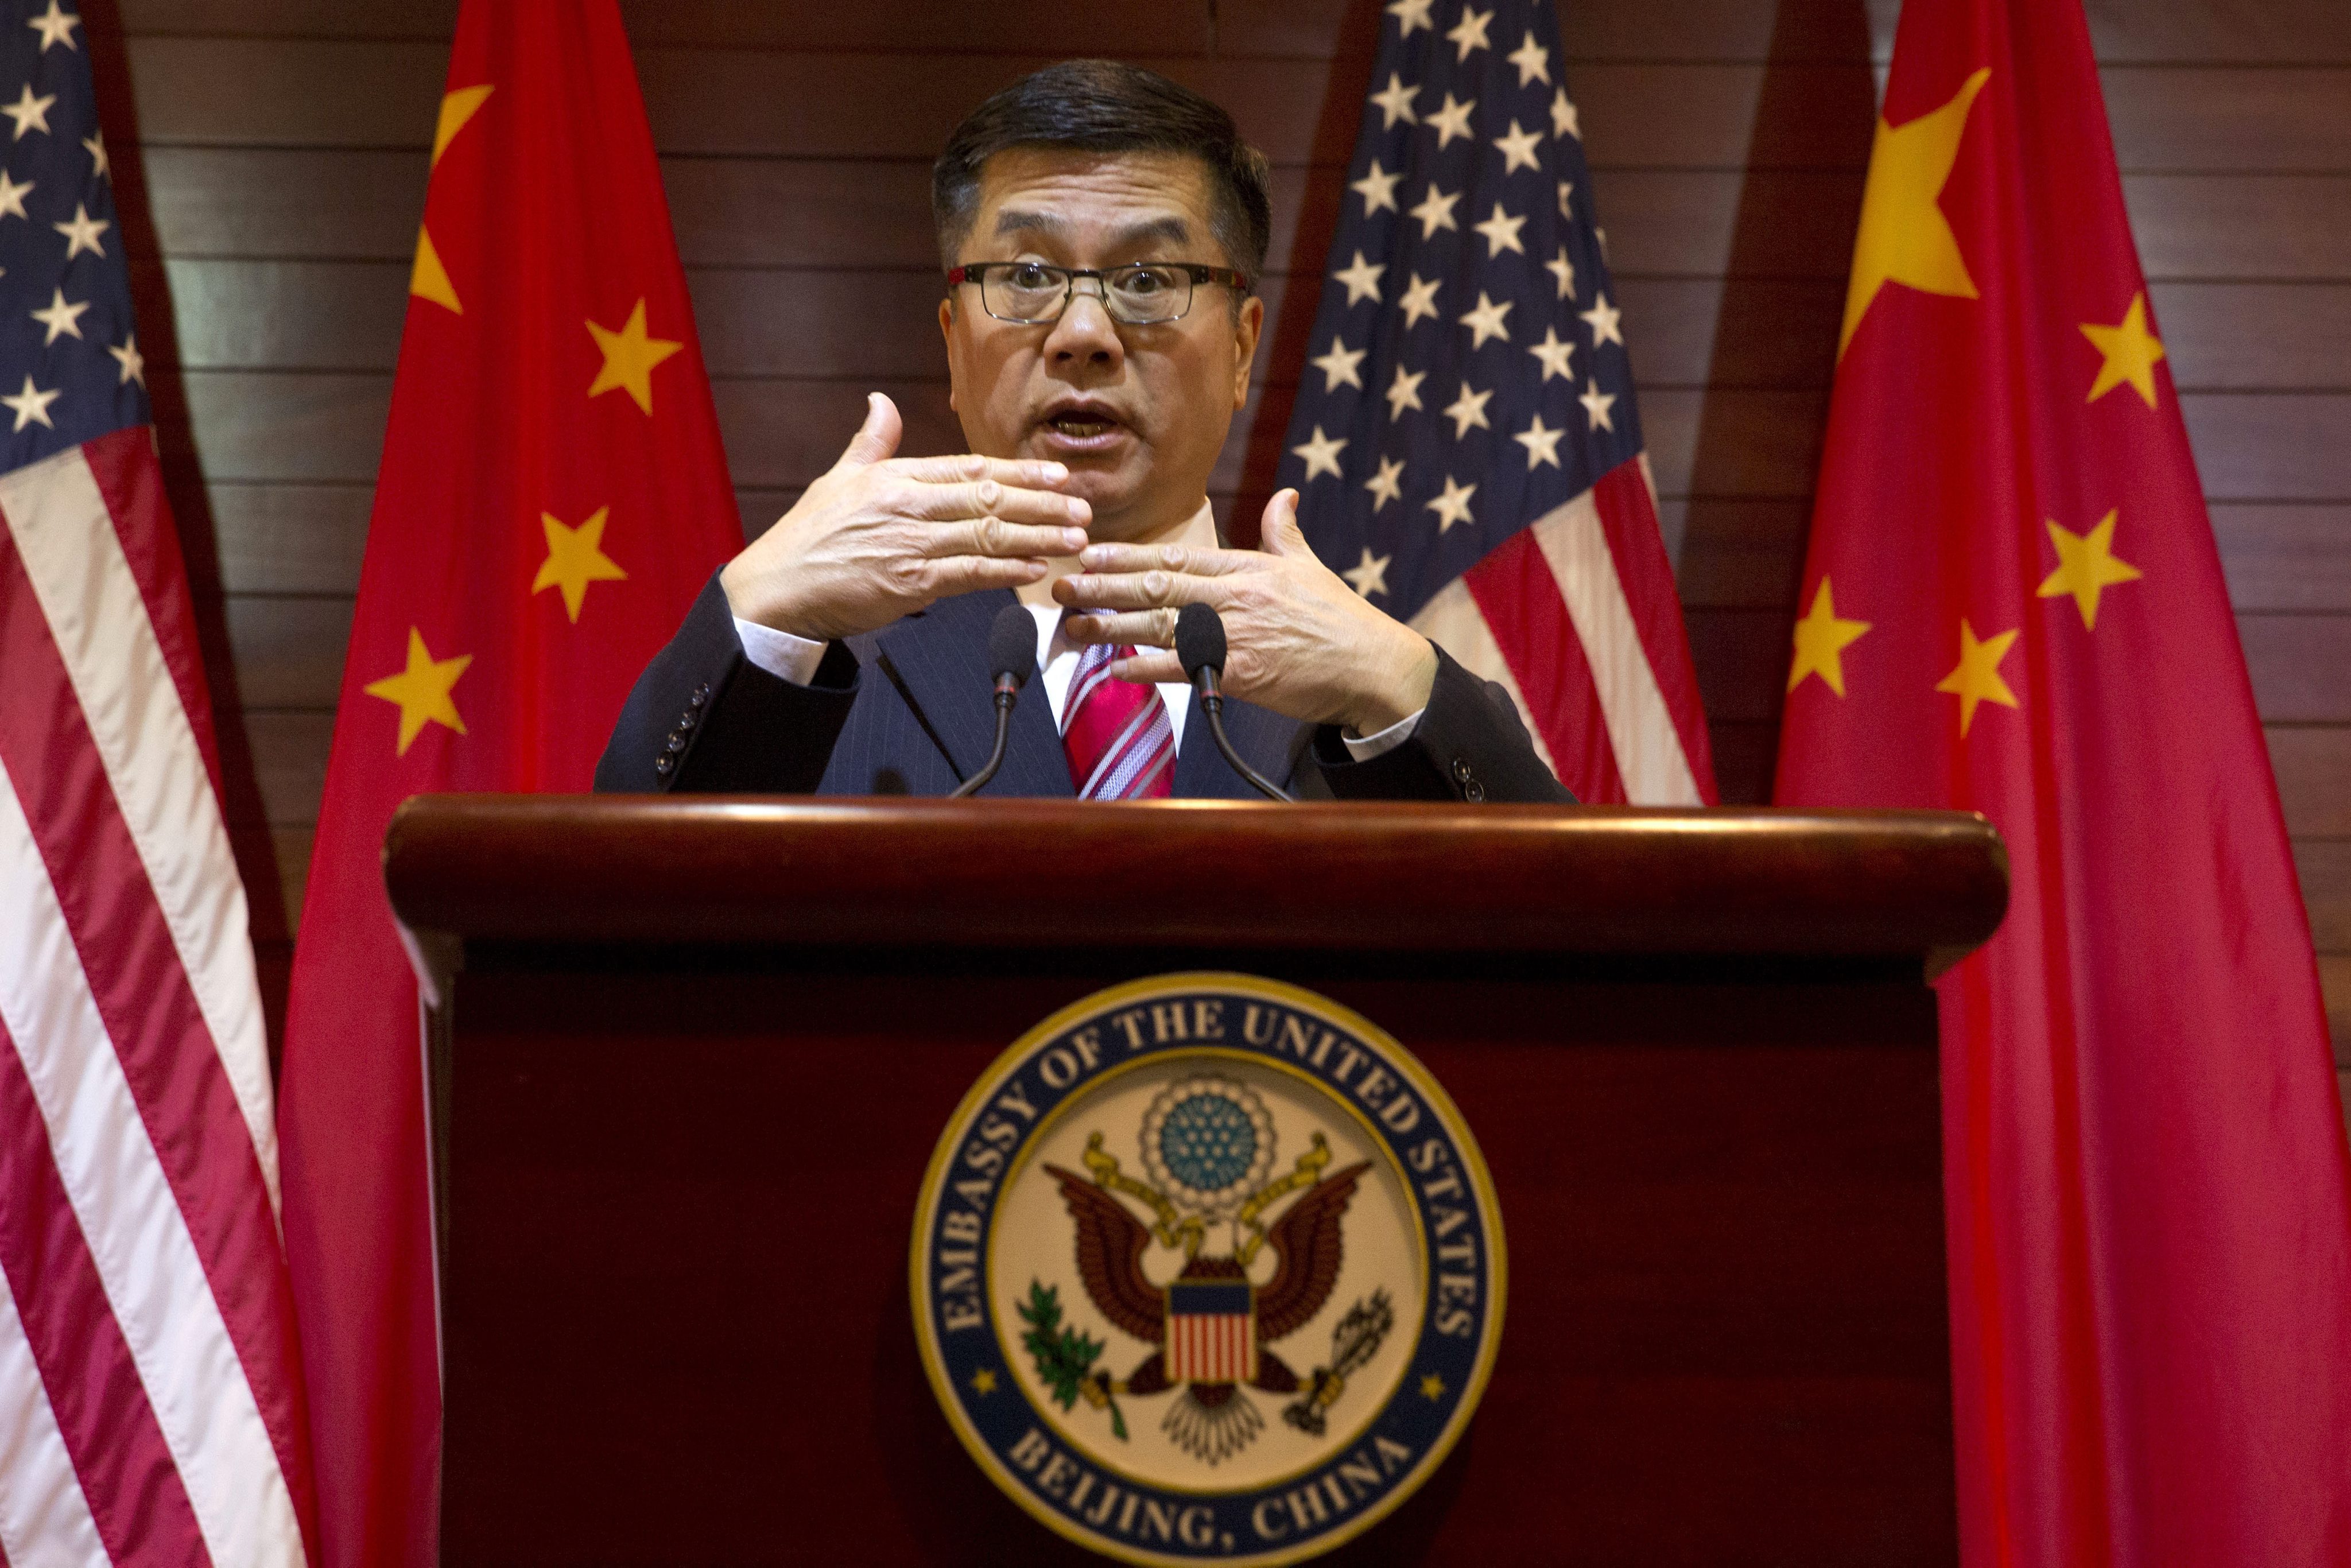 Outgoing US ambassador to China Gary Locke at the US embassy in Beijing on Friday. Photo: EPA